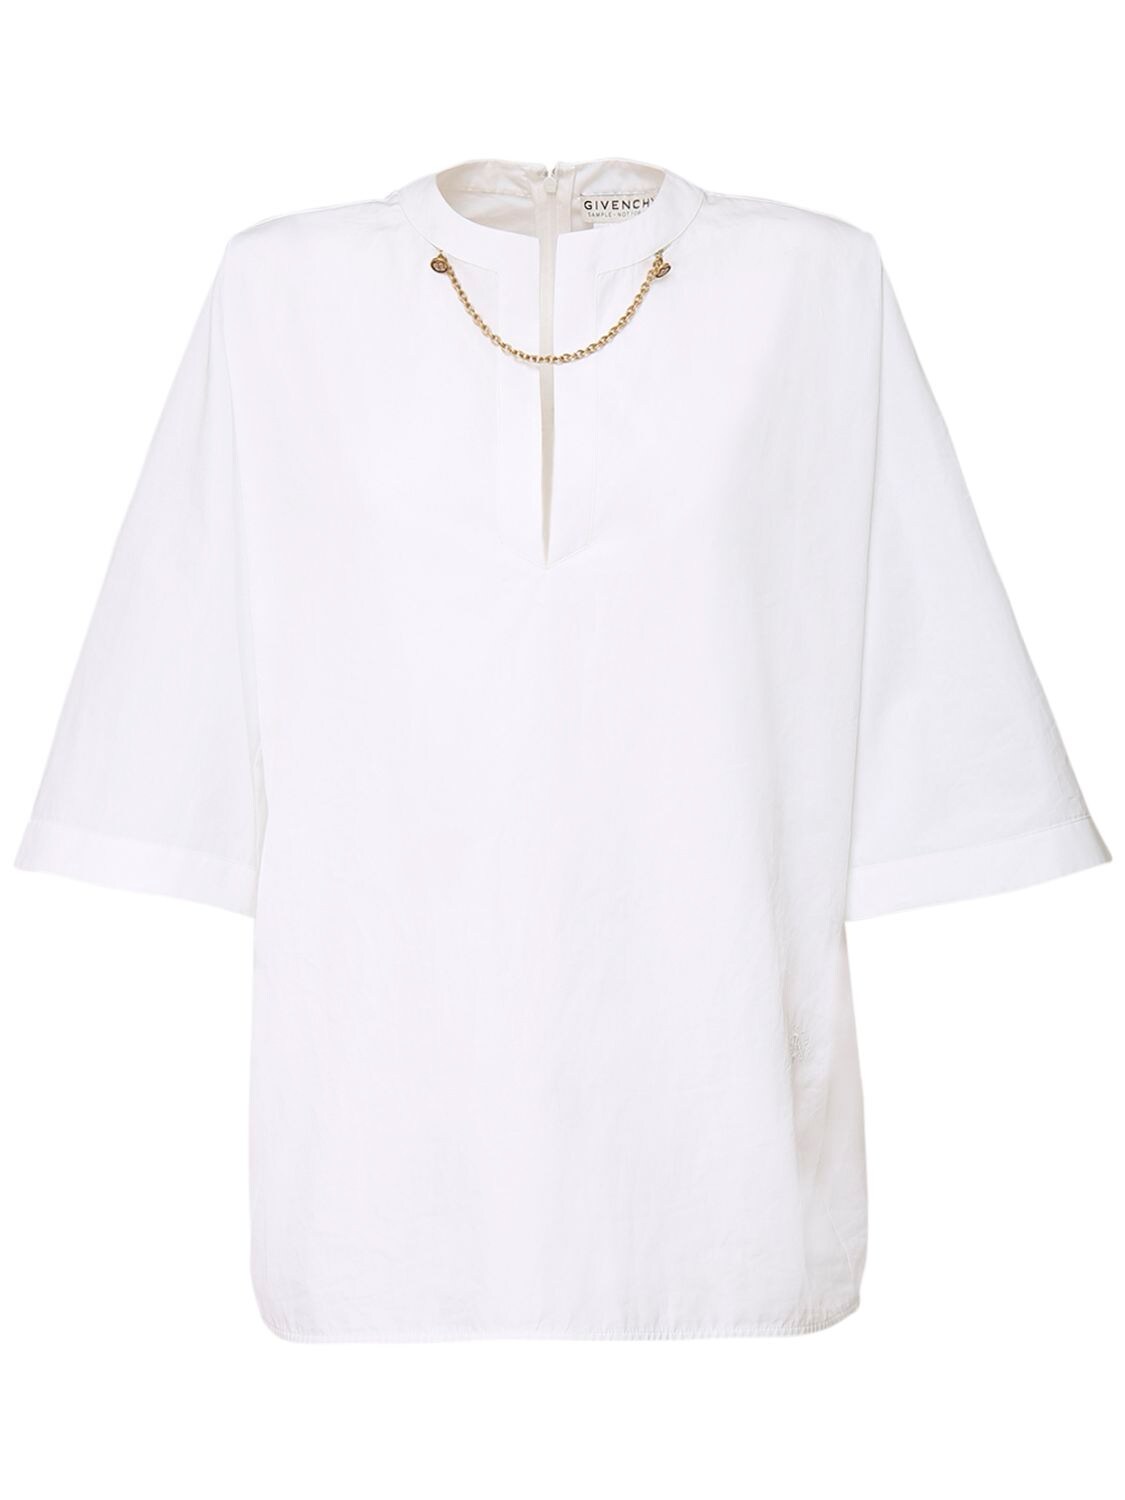 GIVENCHY OVERSIZE COTTON POPLIN TOP W/ CHAIN,72IA7M045-MTAW0